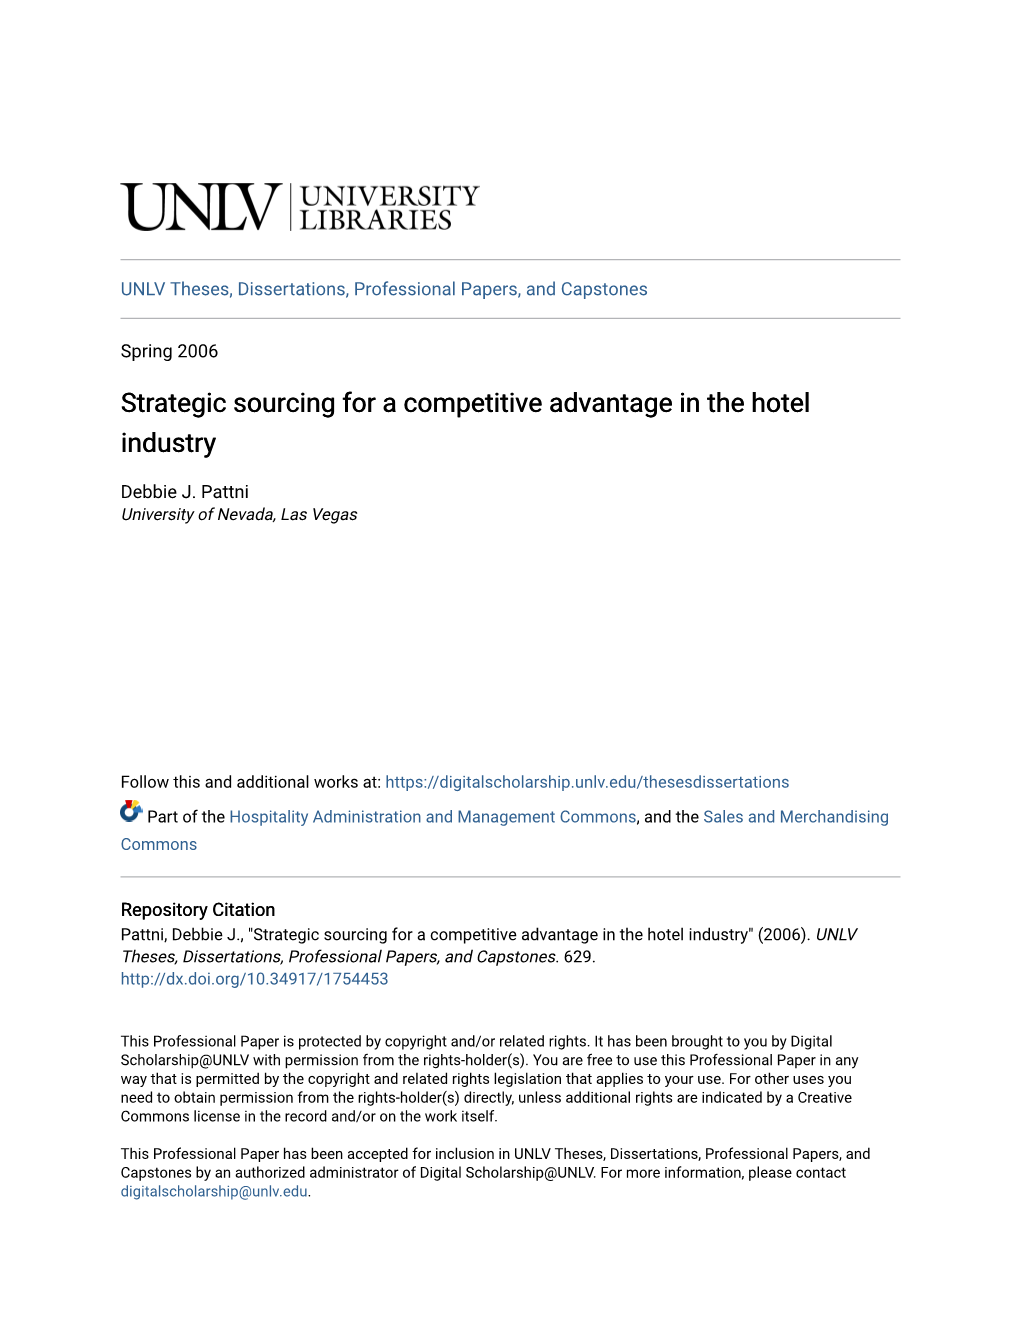 Strategic Sourcing for a Competitive Advantage in the Hotel Industry